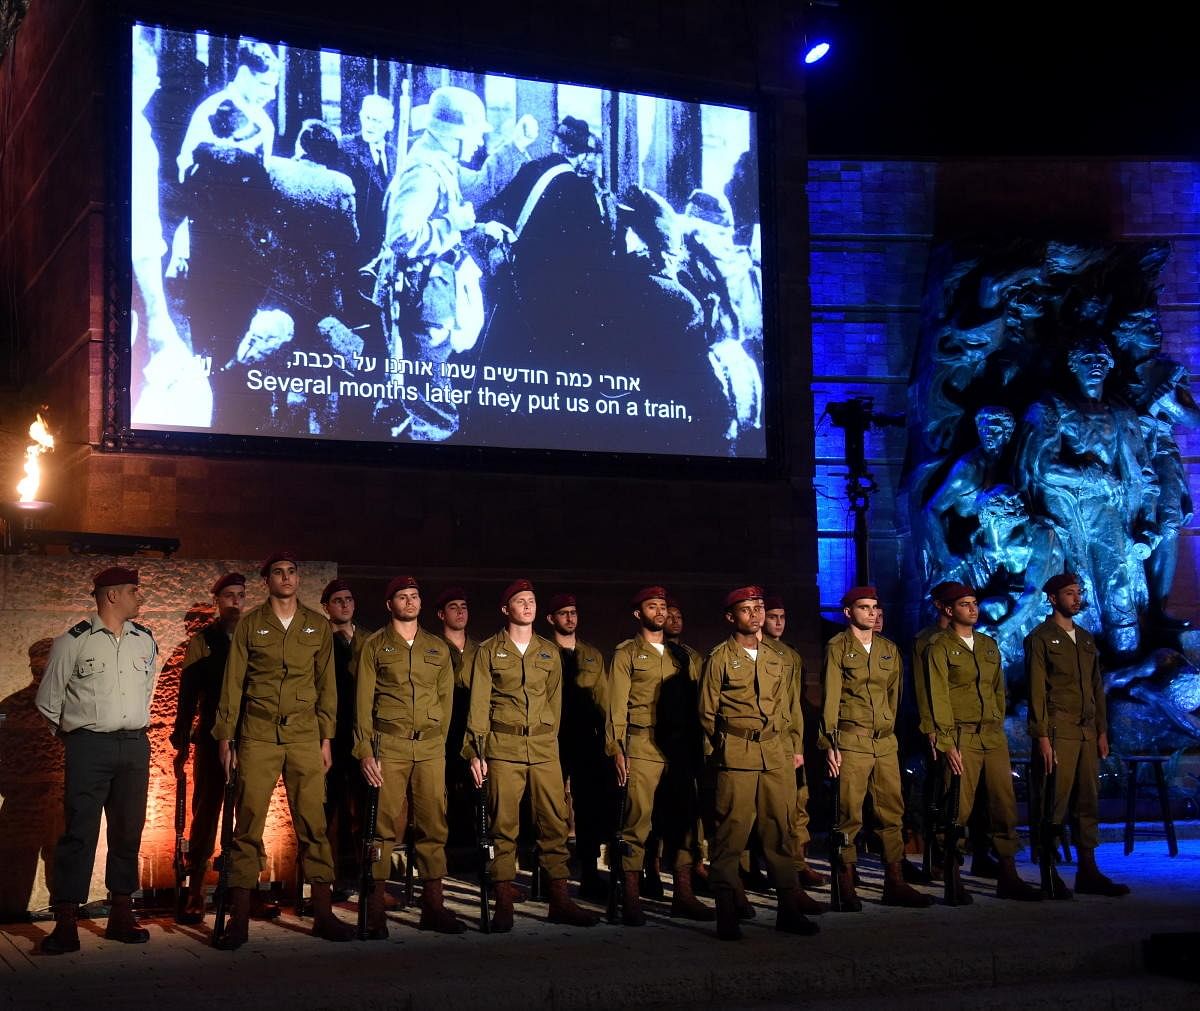 Israeli soldiers stand at the Holocaust Martyrs' and Heroes Remembrance Day opening ceremony in memory of the six million Jewish men, women and children murdered by the Nazis and their collaborators, at Yad Vashem Holocaust Museum in Jerusalem. Credit: Reuters Photo